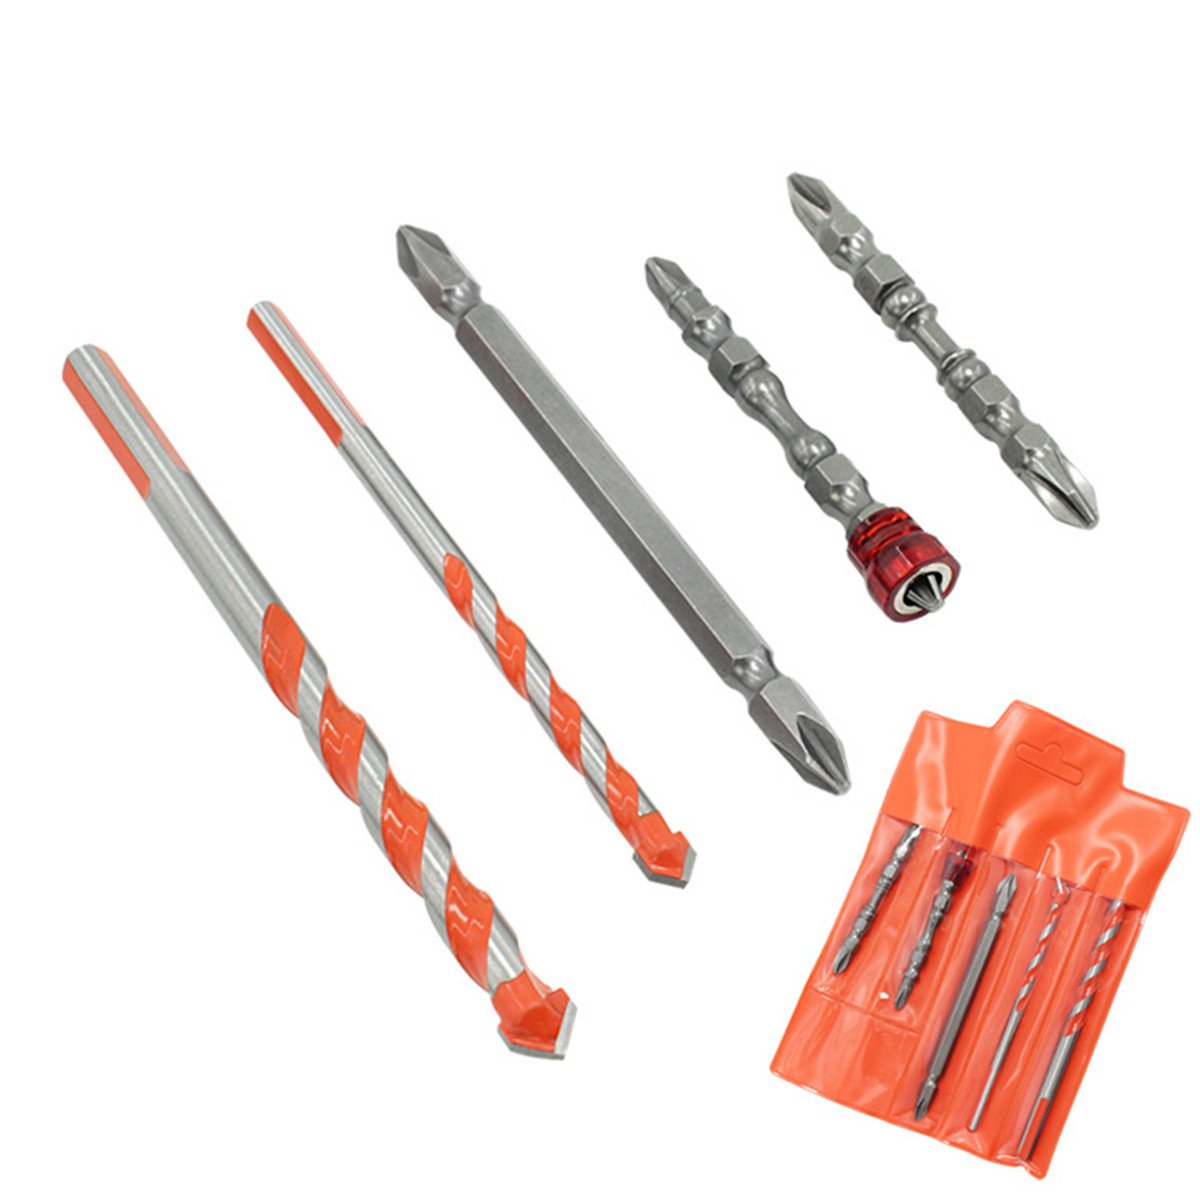 5Pcs-Tile-Glass-Drill-Set-Magnetic-Ring-Cross-Screwdriver-Bit-Multifunctional-Cutter-Marble-1602044-3